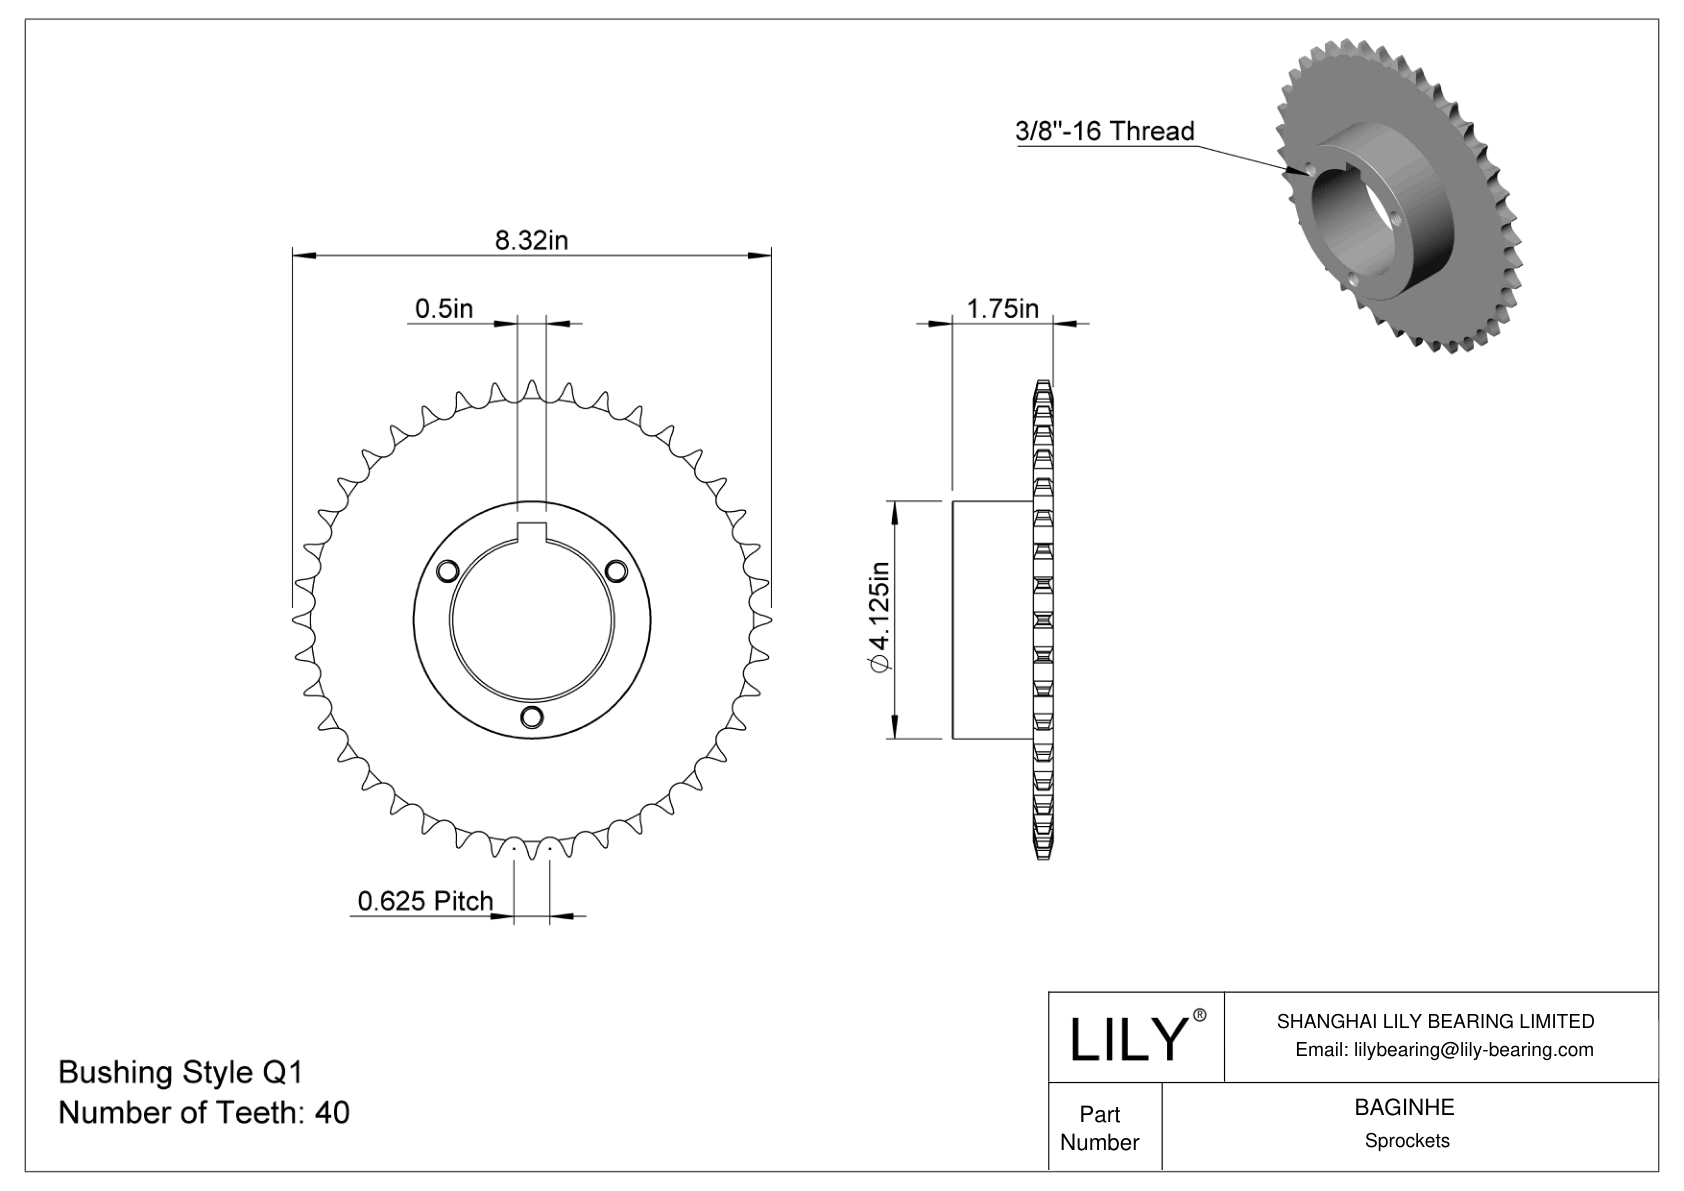 BAGINHE Split-Tapered Bushing-Bore Sprockets for ANSI Roller Chain cad drawing